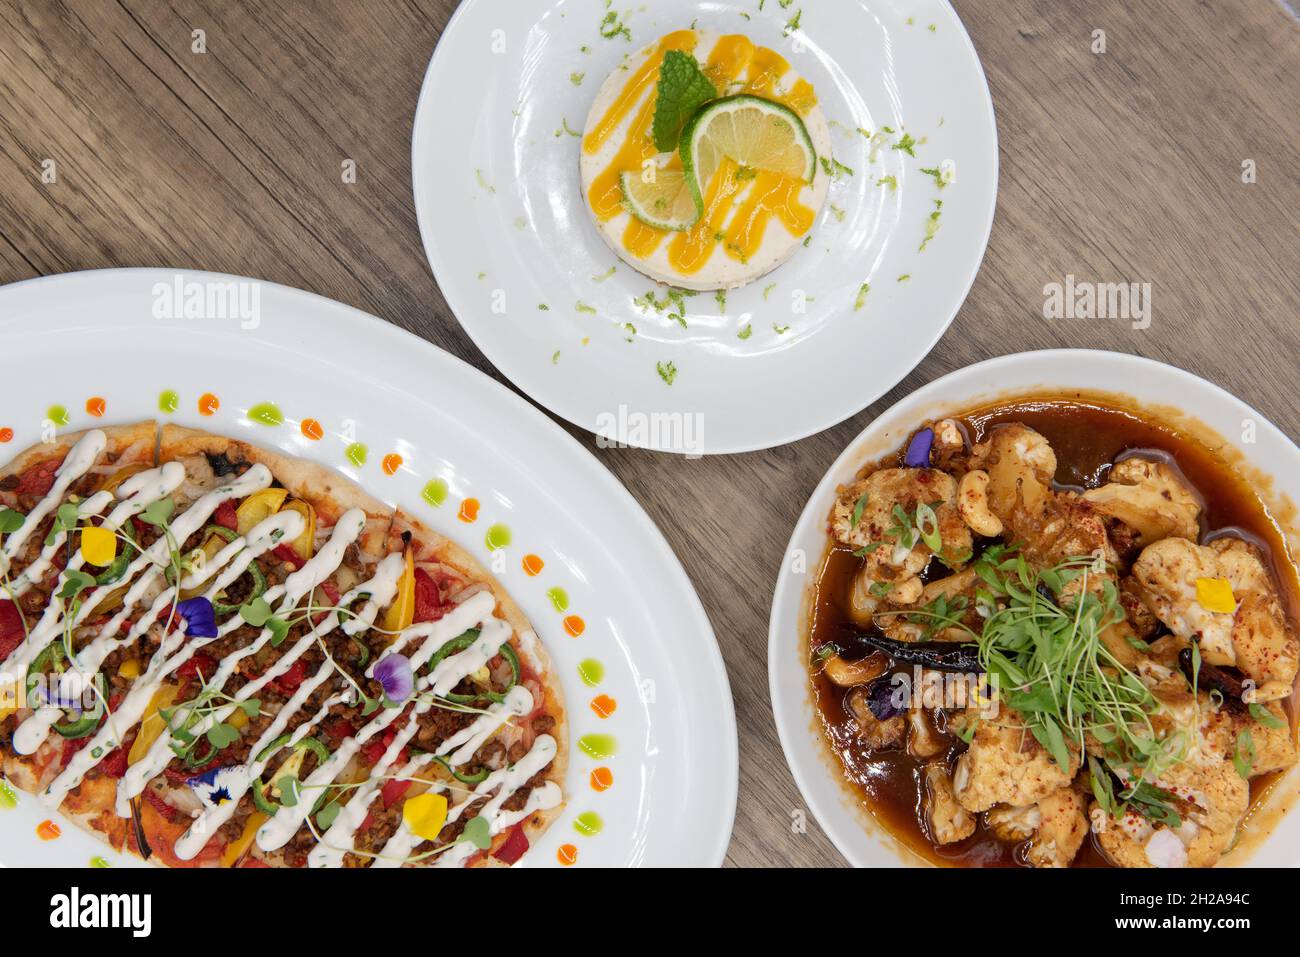 Overhead view of hearty table of flat bread pizza, key lime pie, and tangy roasted cauliflower on a wooden surface. Stock Photo